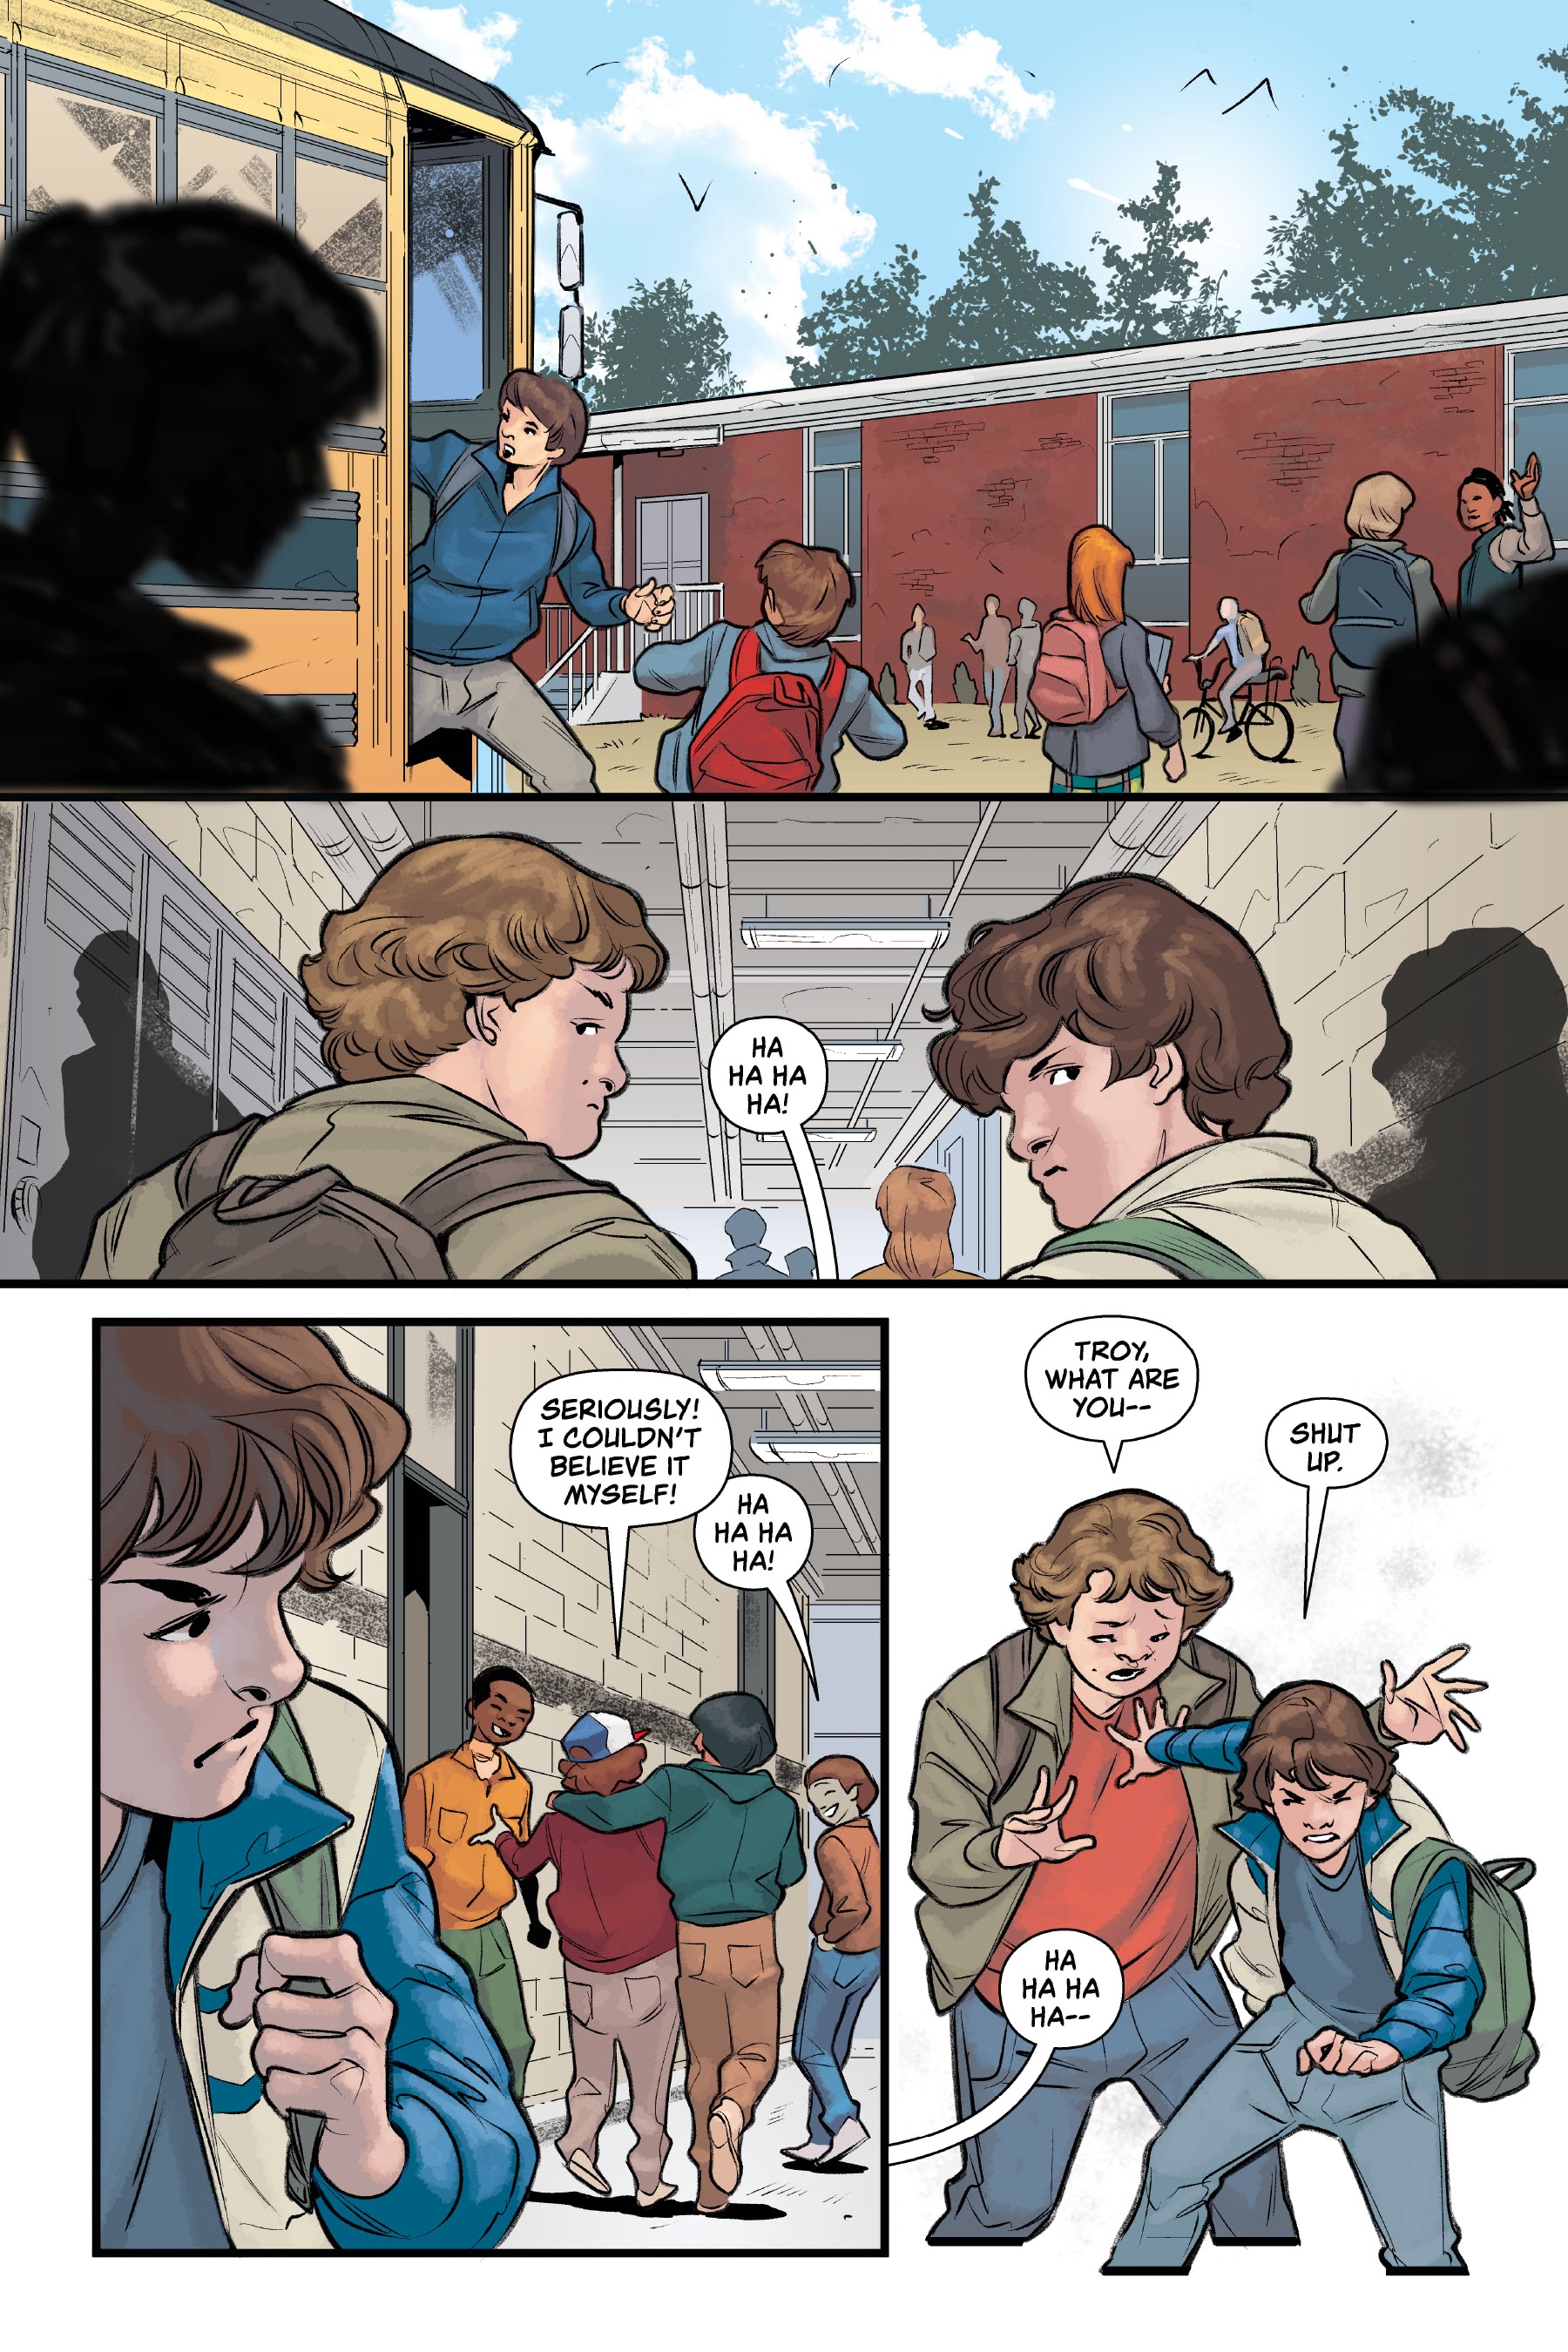 Read online Stranger Things: The Bully comic -  Issue # TPB - 16